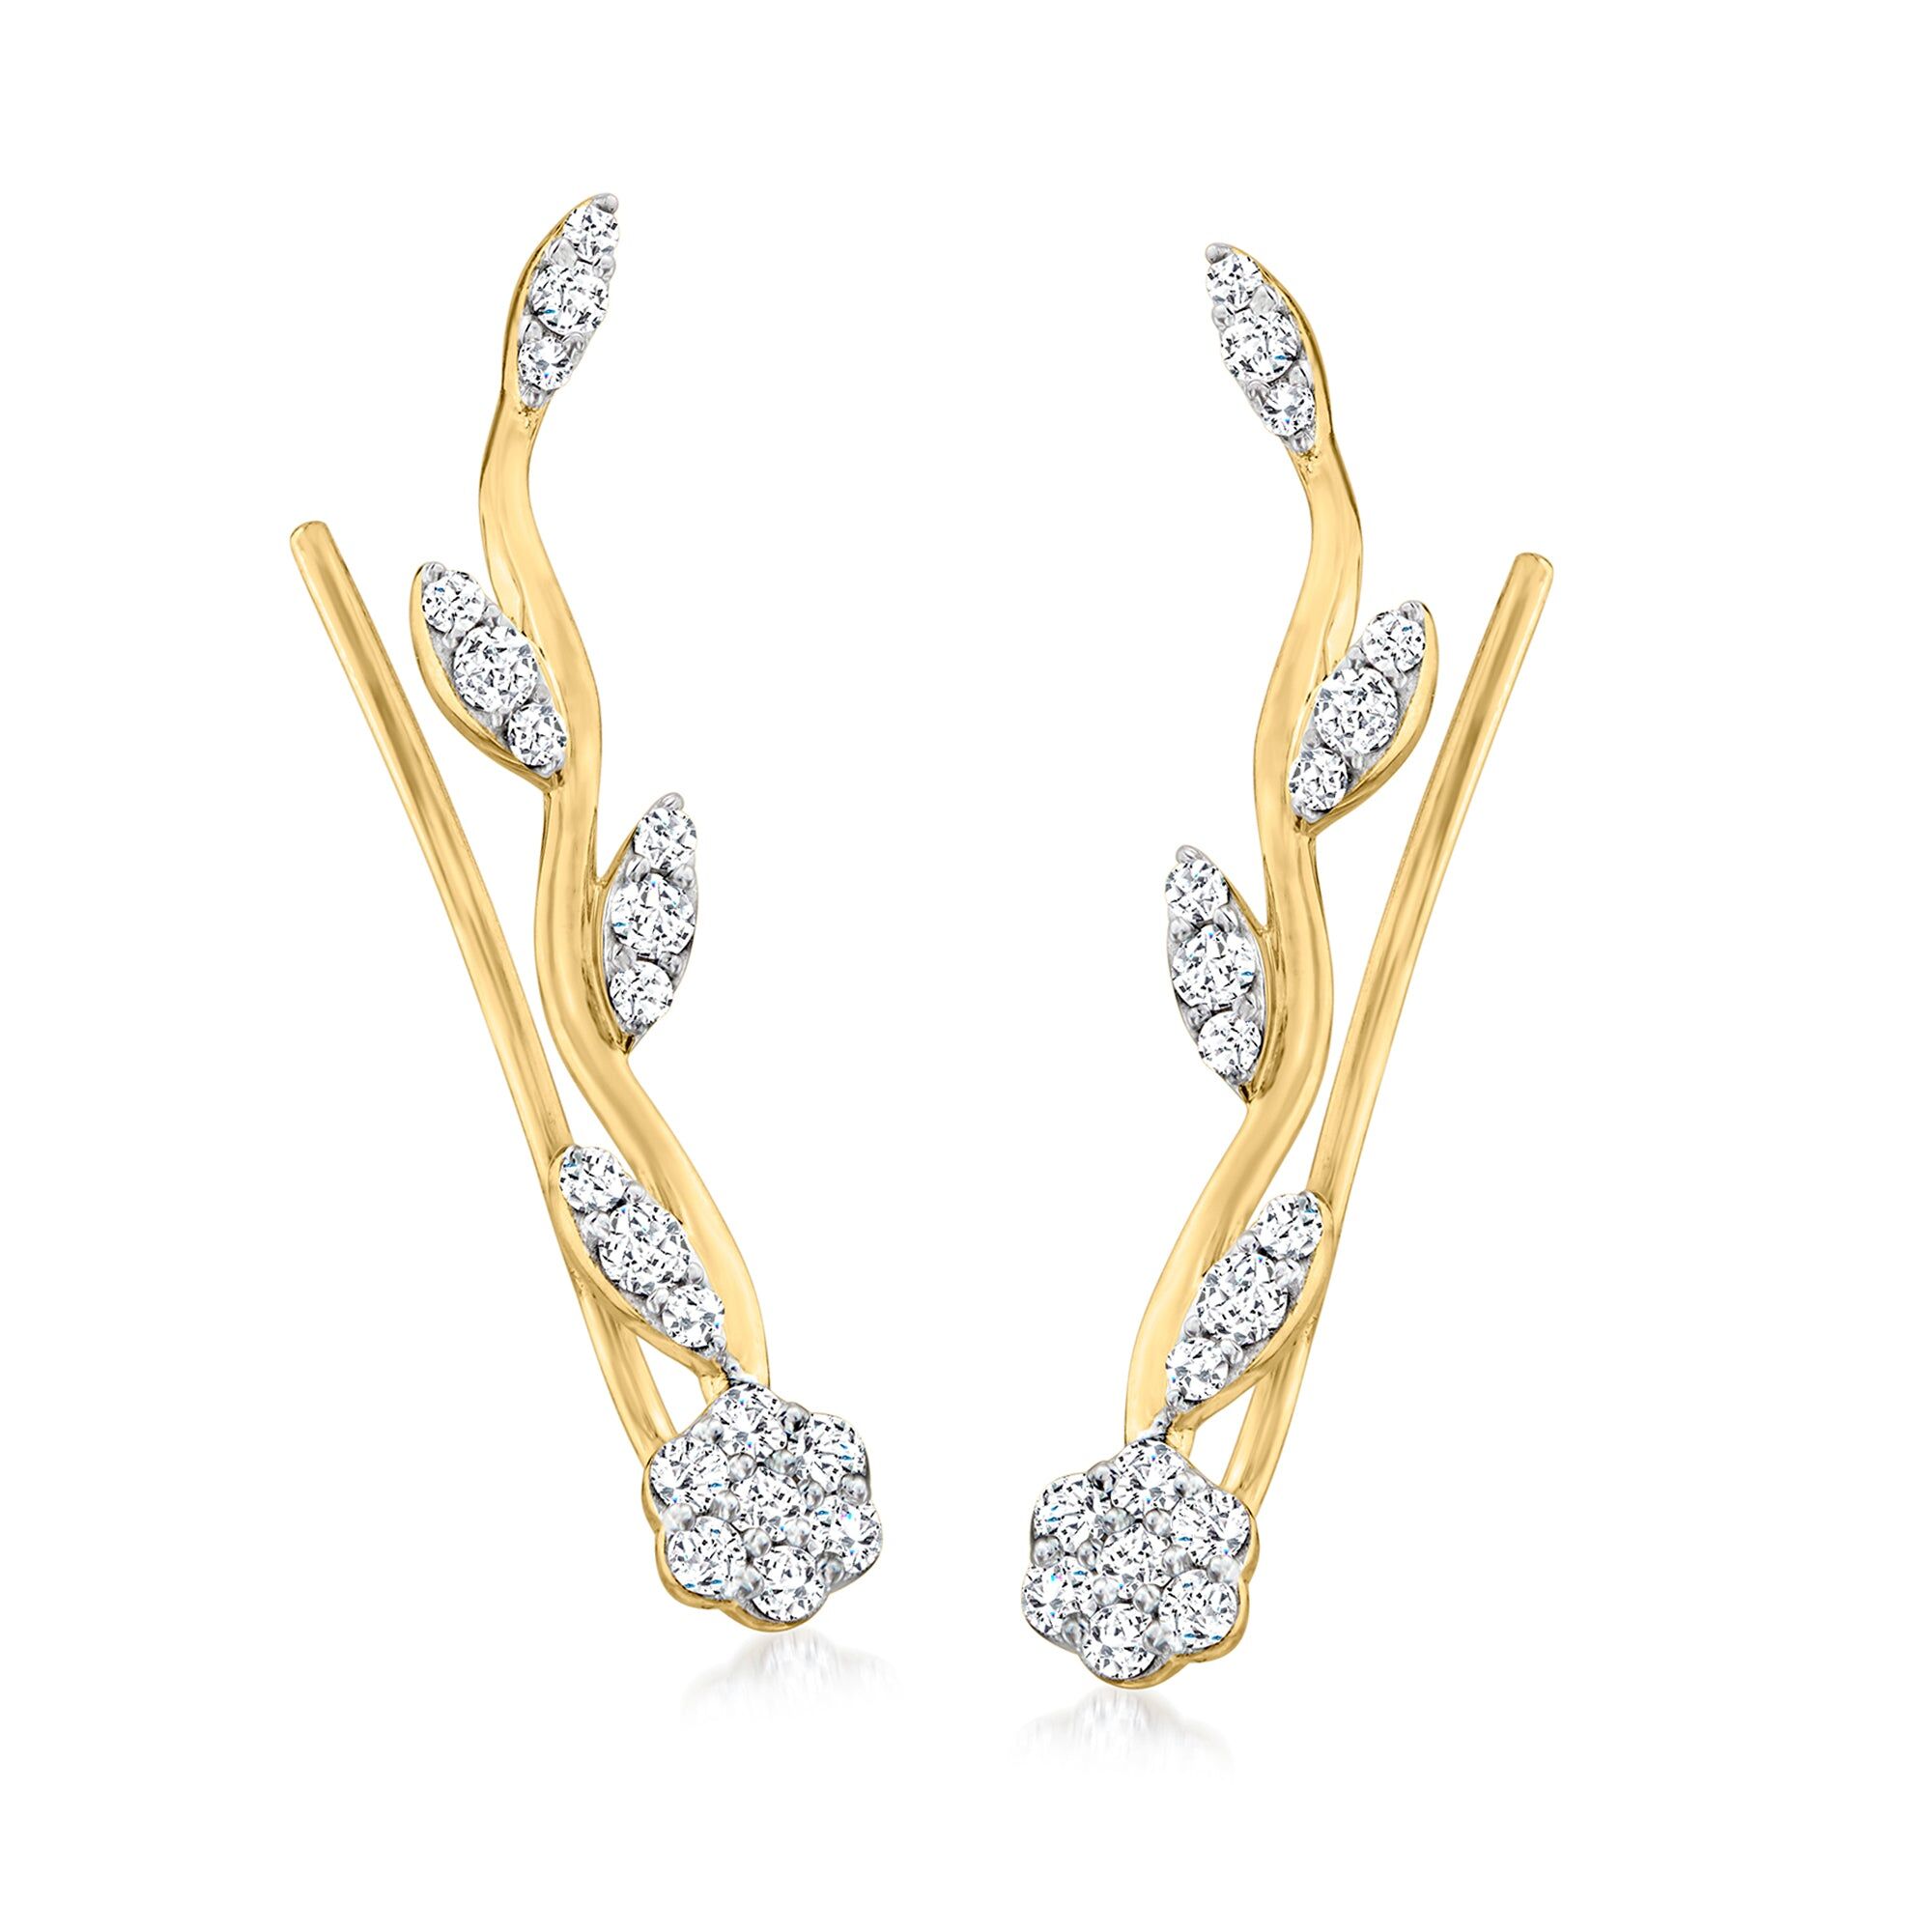 Ross-Simons Diamond Floral Ear Climbers in 14kt Yellow Gold female